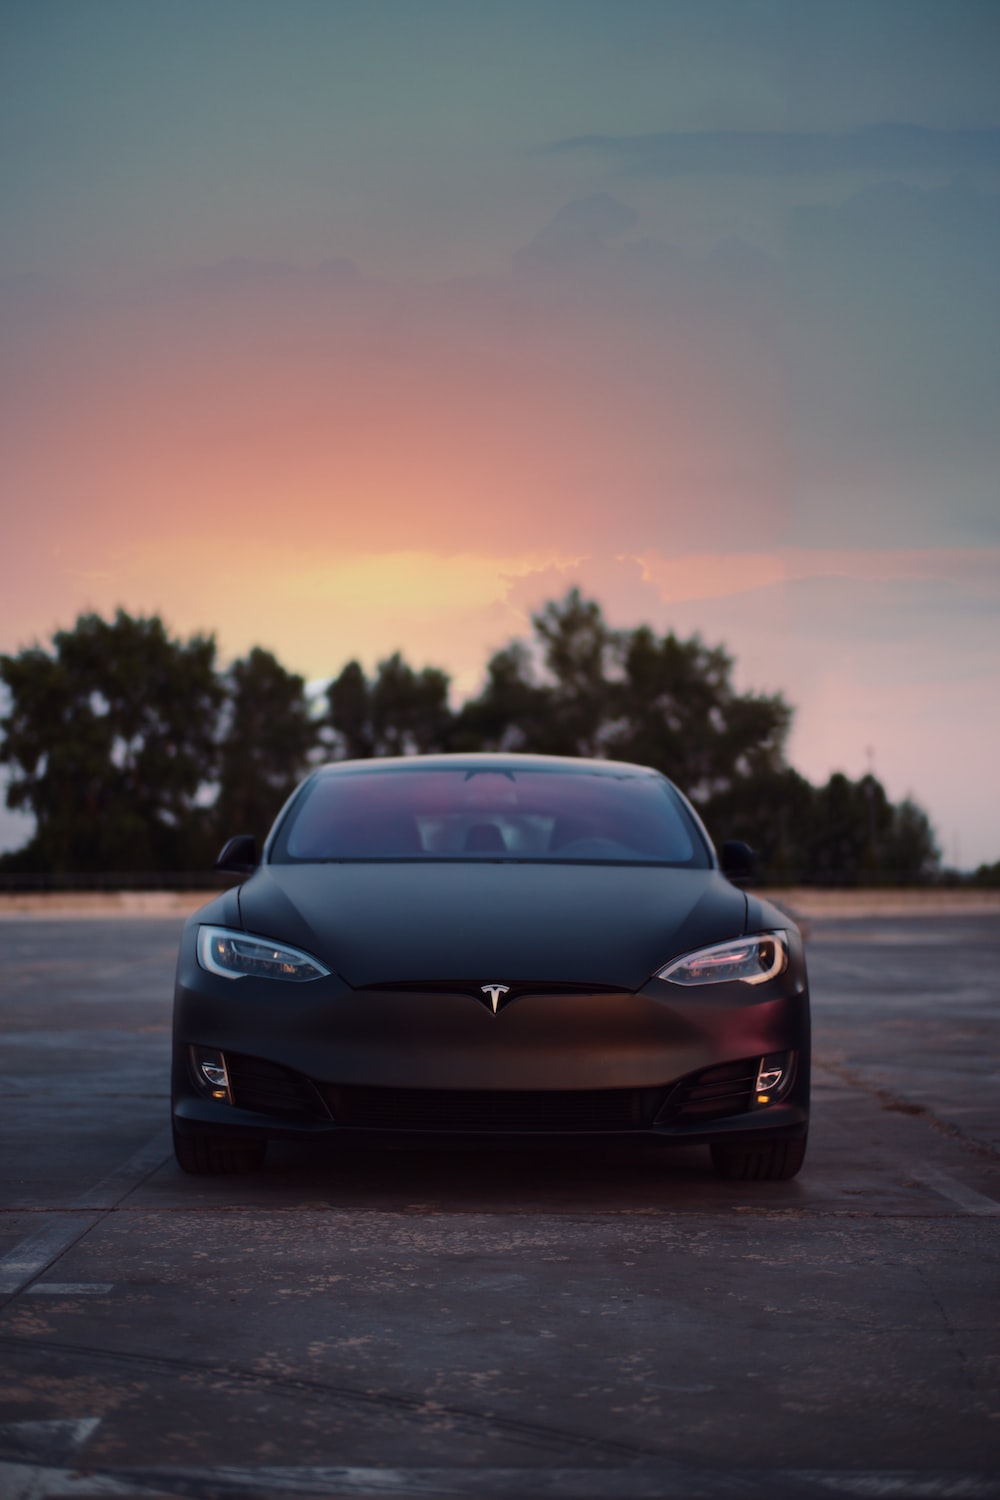 Tesla pictures hd download free images on